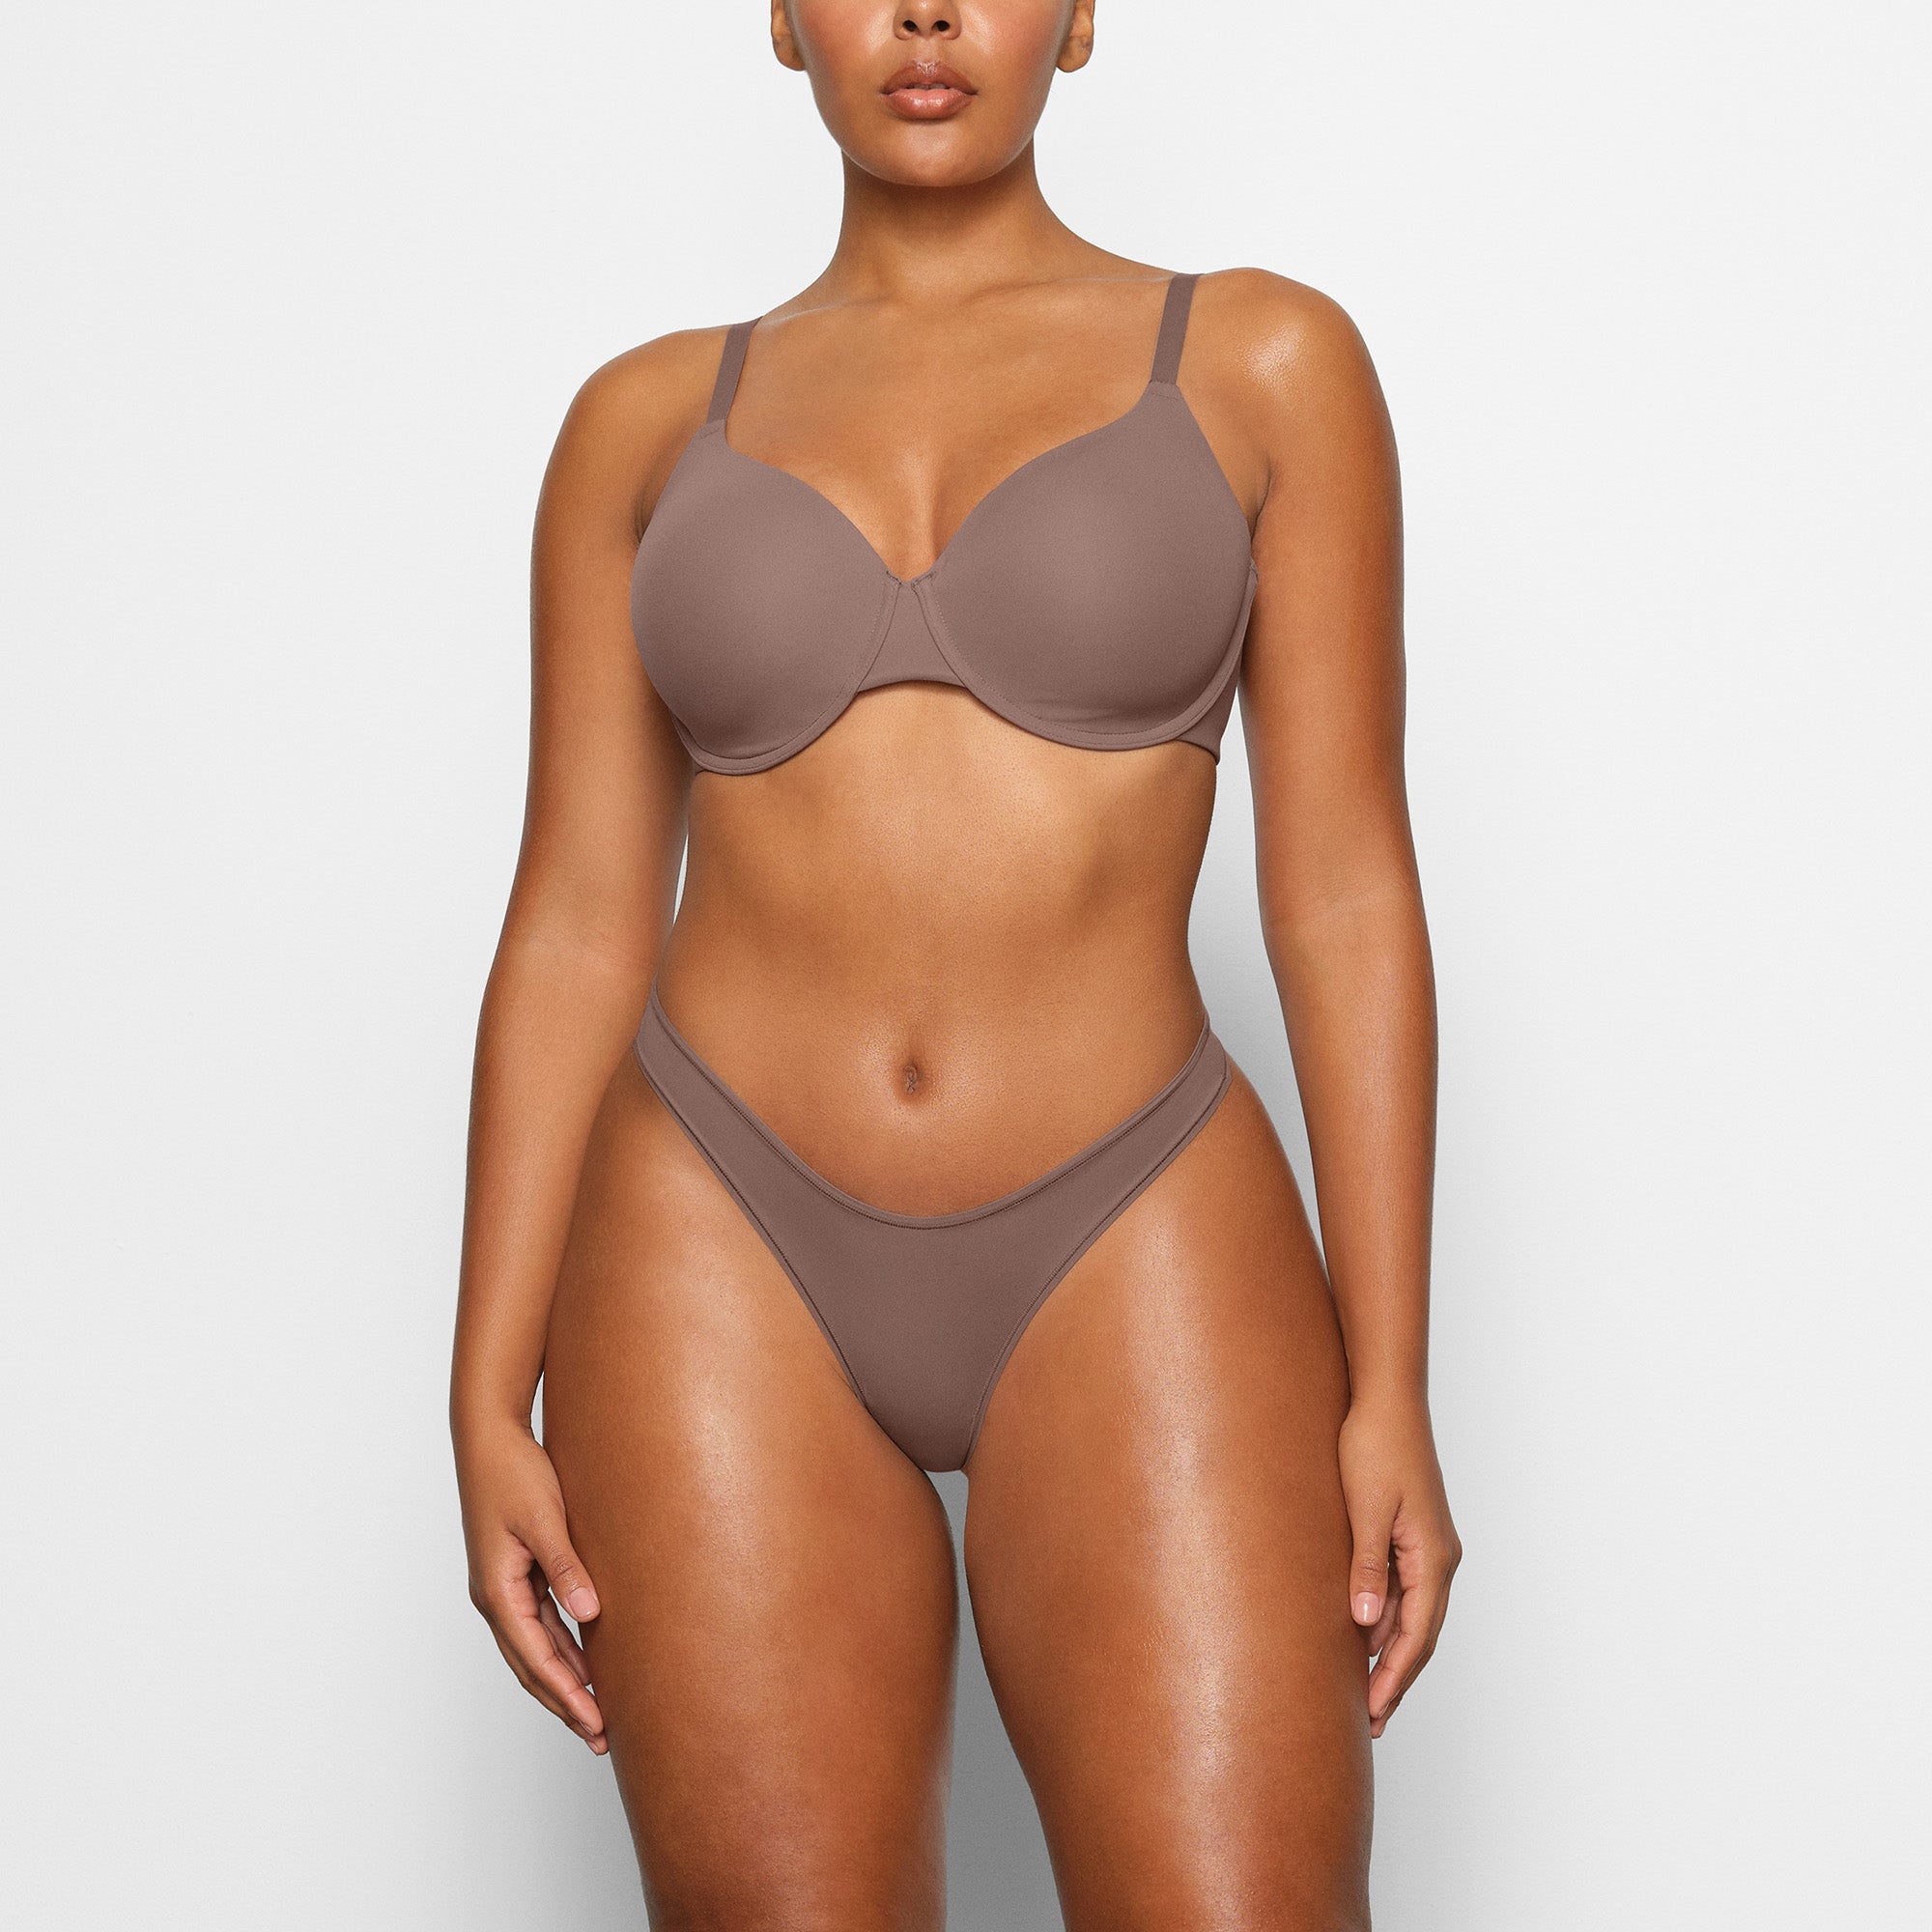 SKIMS Fits Everybody T-shirt Underwire Push-up Bra in Clay 32DDD Size 32 F  / DDD - $65 New With Tags - From Matilda